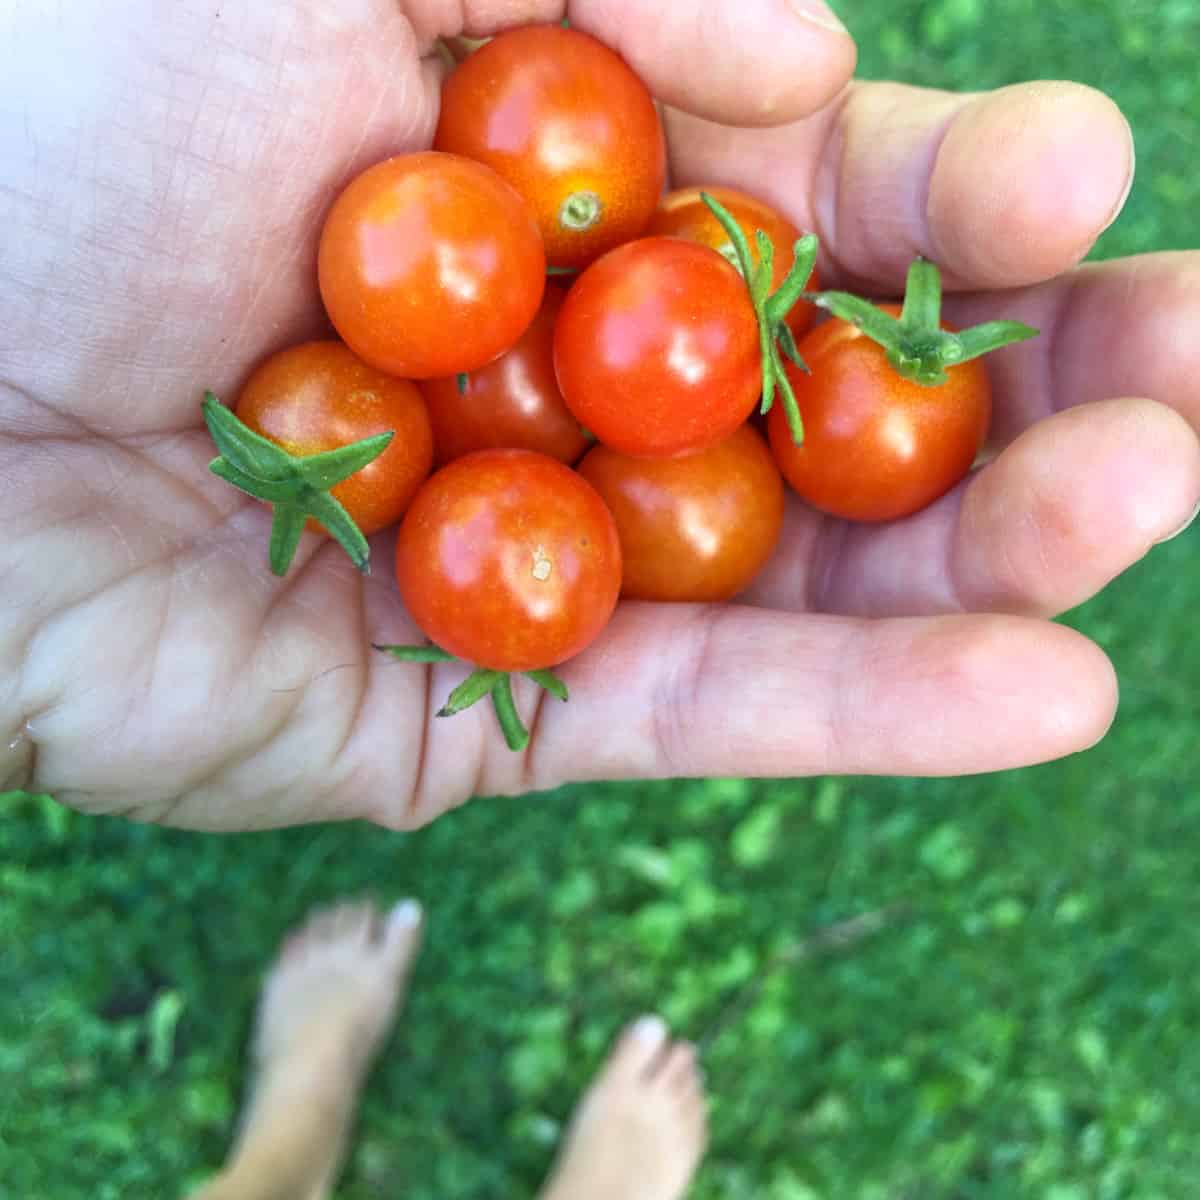 A woman's hand holding a handful of cherry tomatoes that she has just harvested.